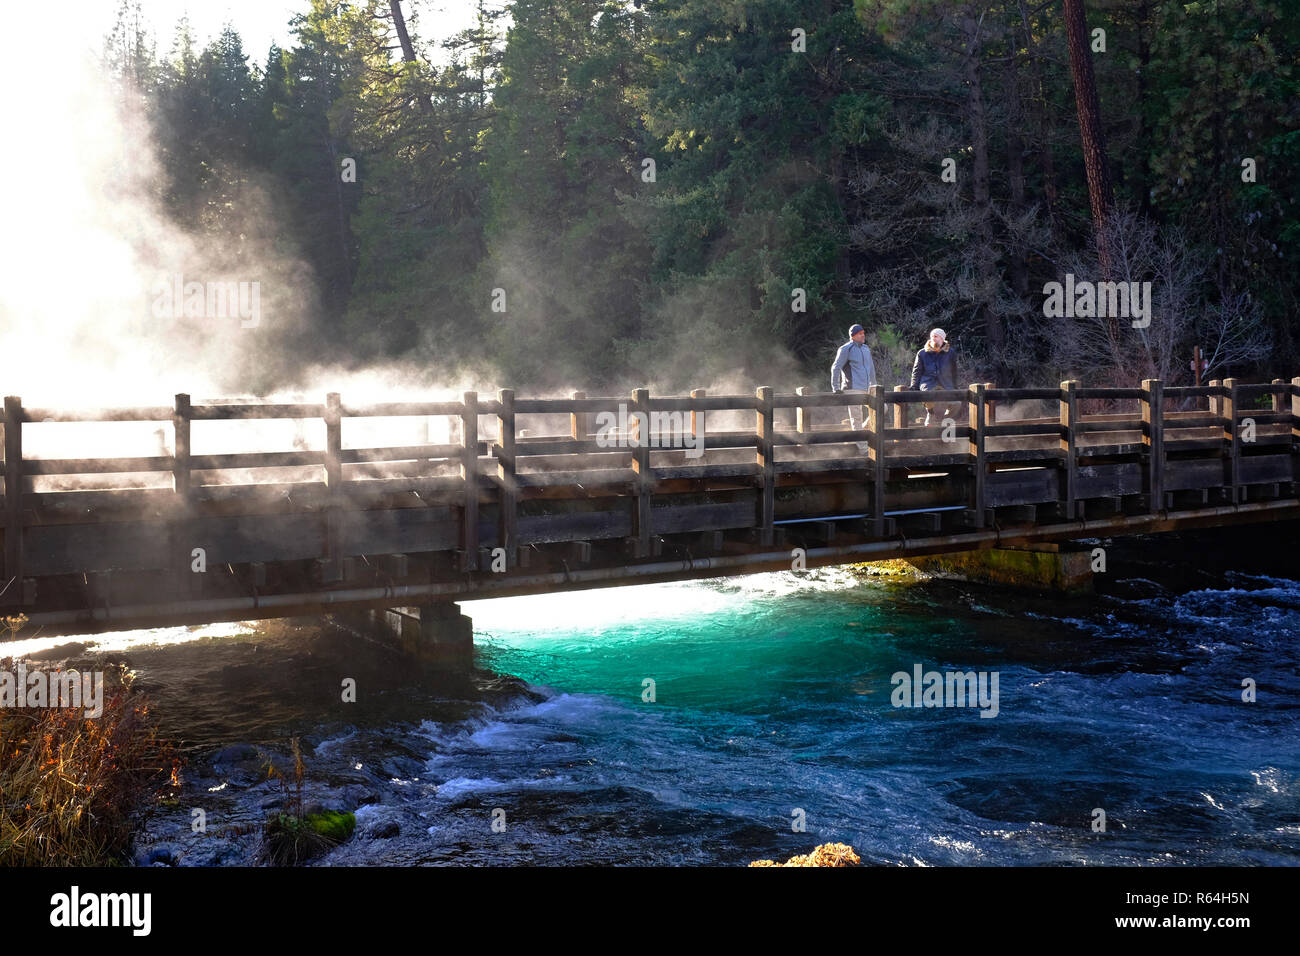 A morning mist rises from the Metolius River in the Cascade Mountains of Oregon, while two hikers enjoy the view. Stock Photo